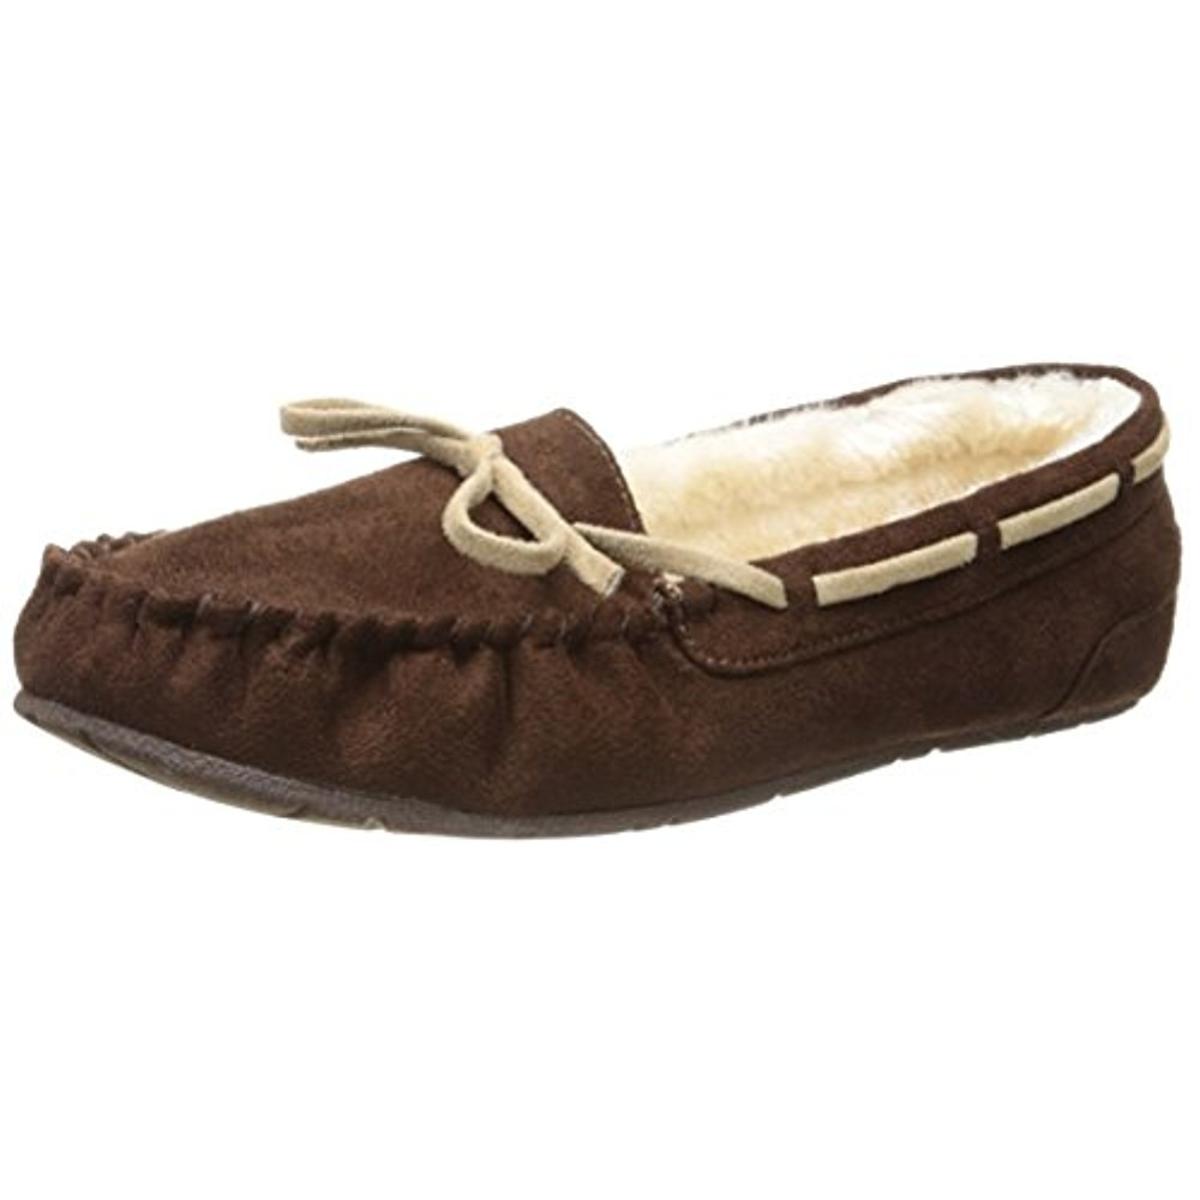 Unionbay 7662 Womens Yum Faux Suede Loafers Flat Boat Shoes BHFO | eBay